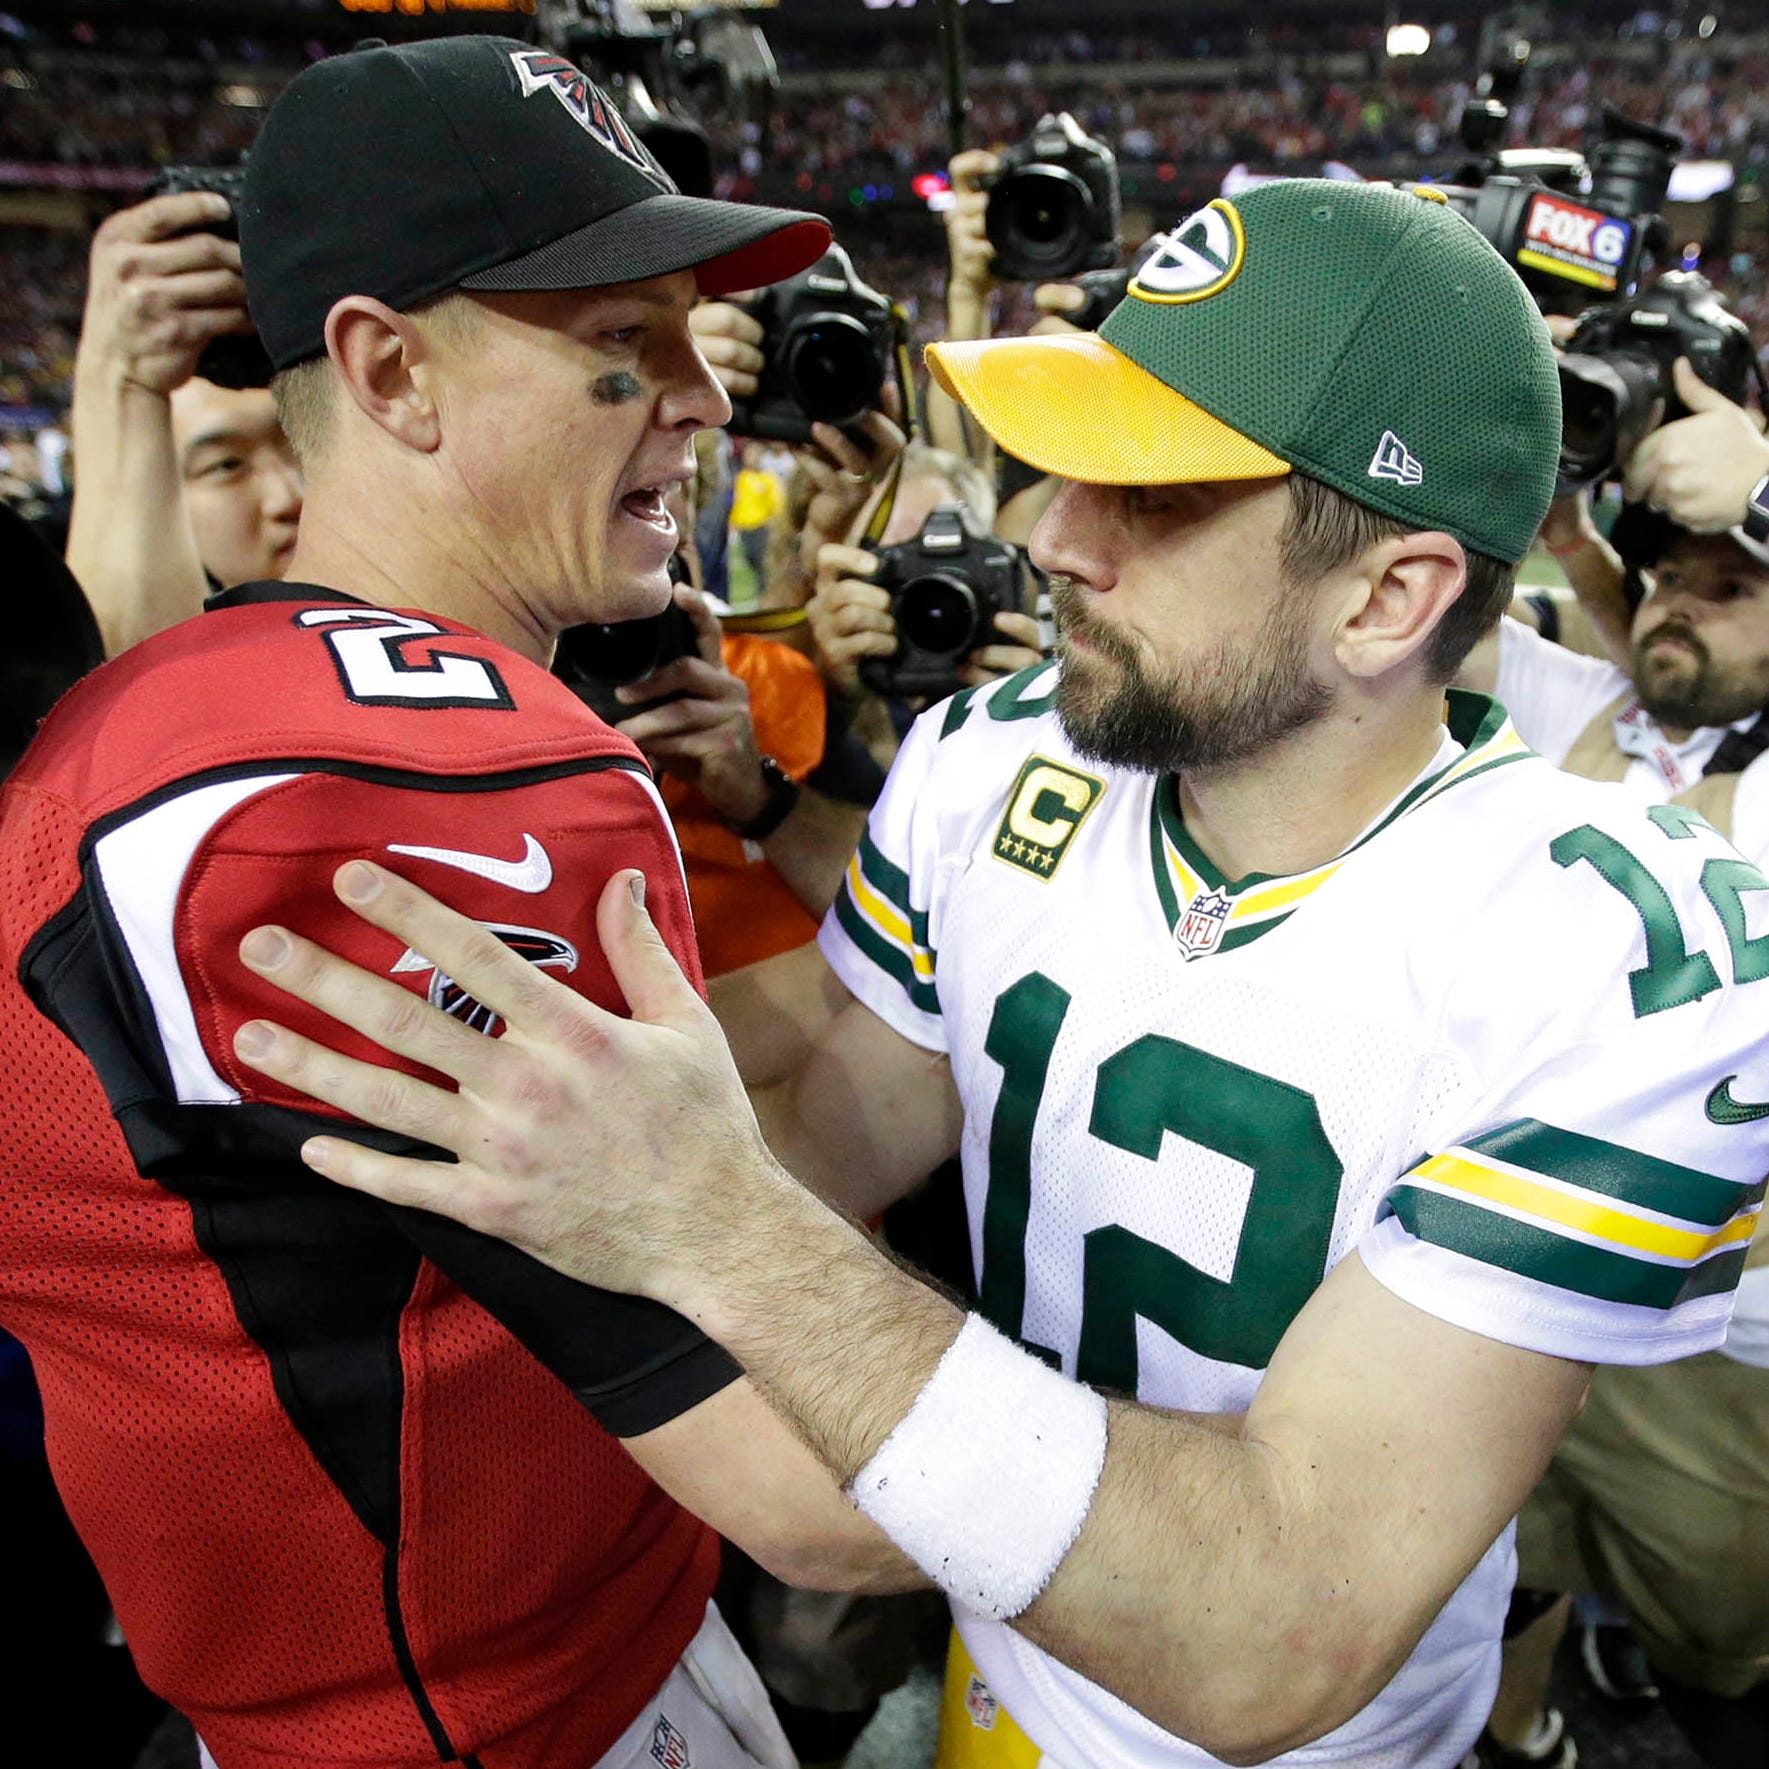 Falcons QB Matt Ryan (2) and Packers QB Aaron Rodgers each appear to enter the 2018 NFL season with justifiable Super Bowl hopes.